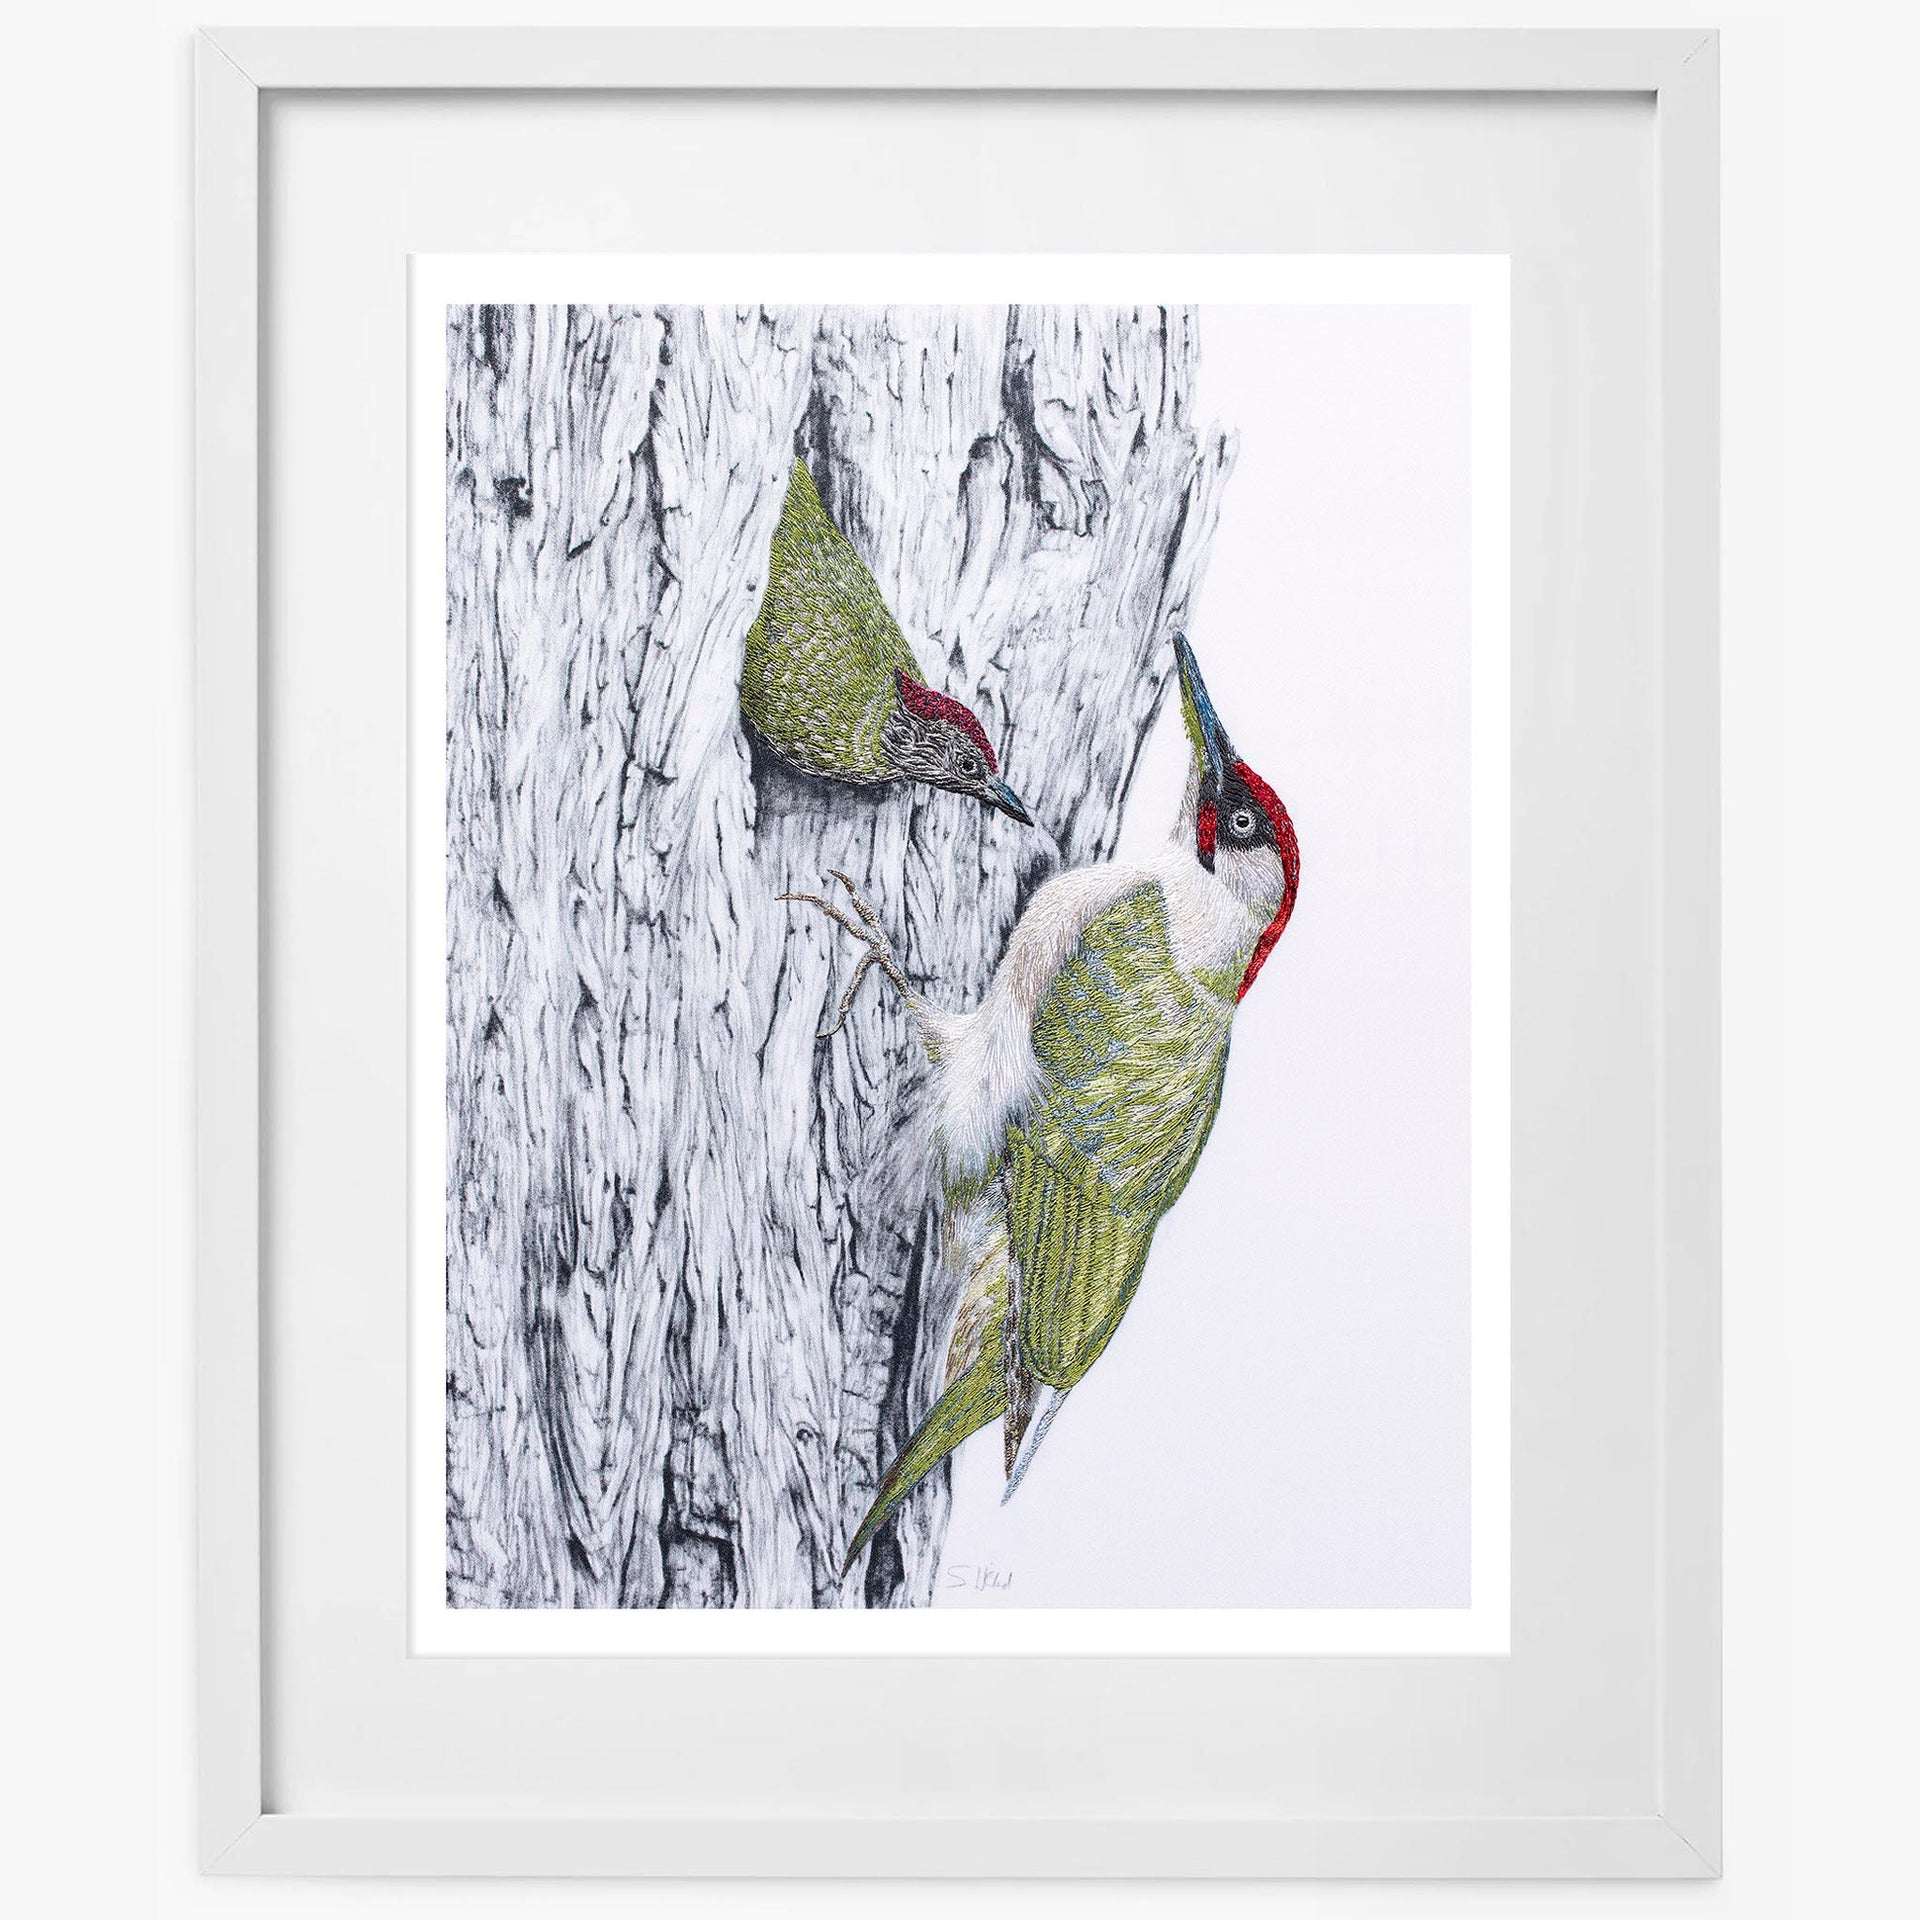 Woodpeckers hand embroidered limited edition print in white frame